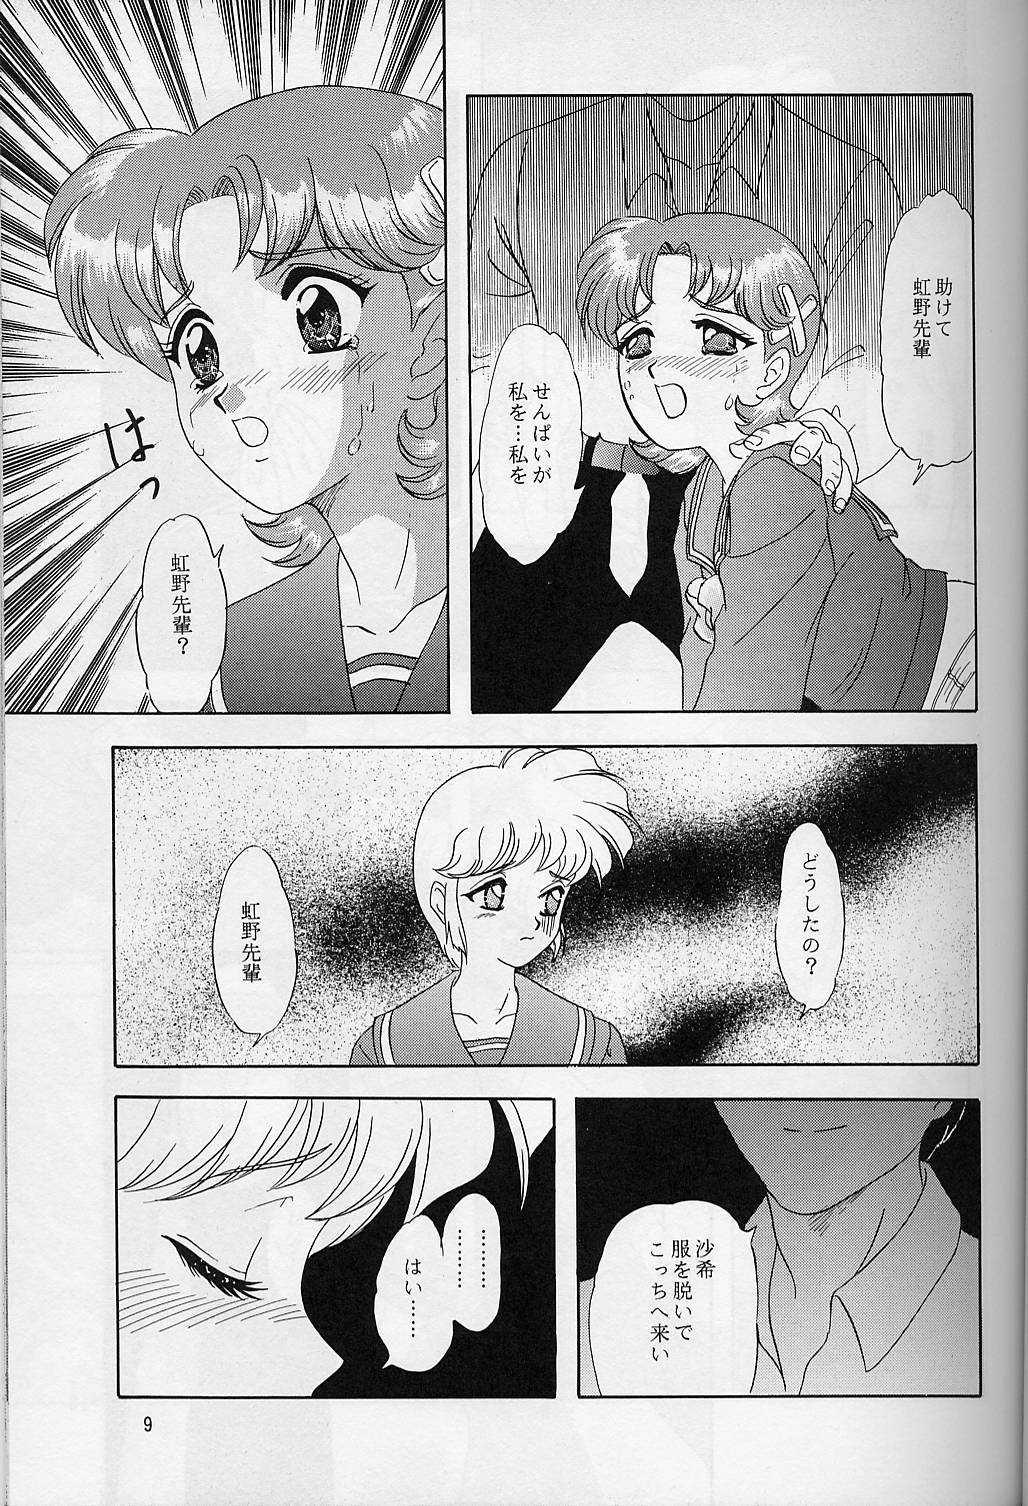 First Time Lunch Box 30 - Lunch Time 10 - Tokimeki memorial Mediumtits - Page 8